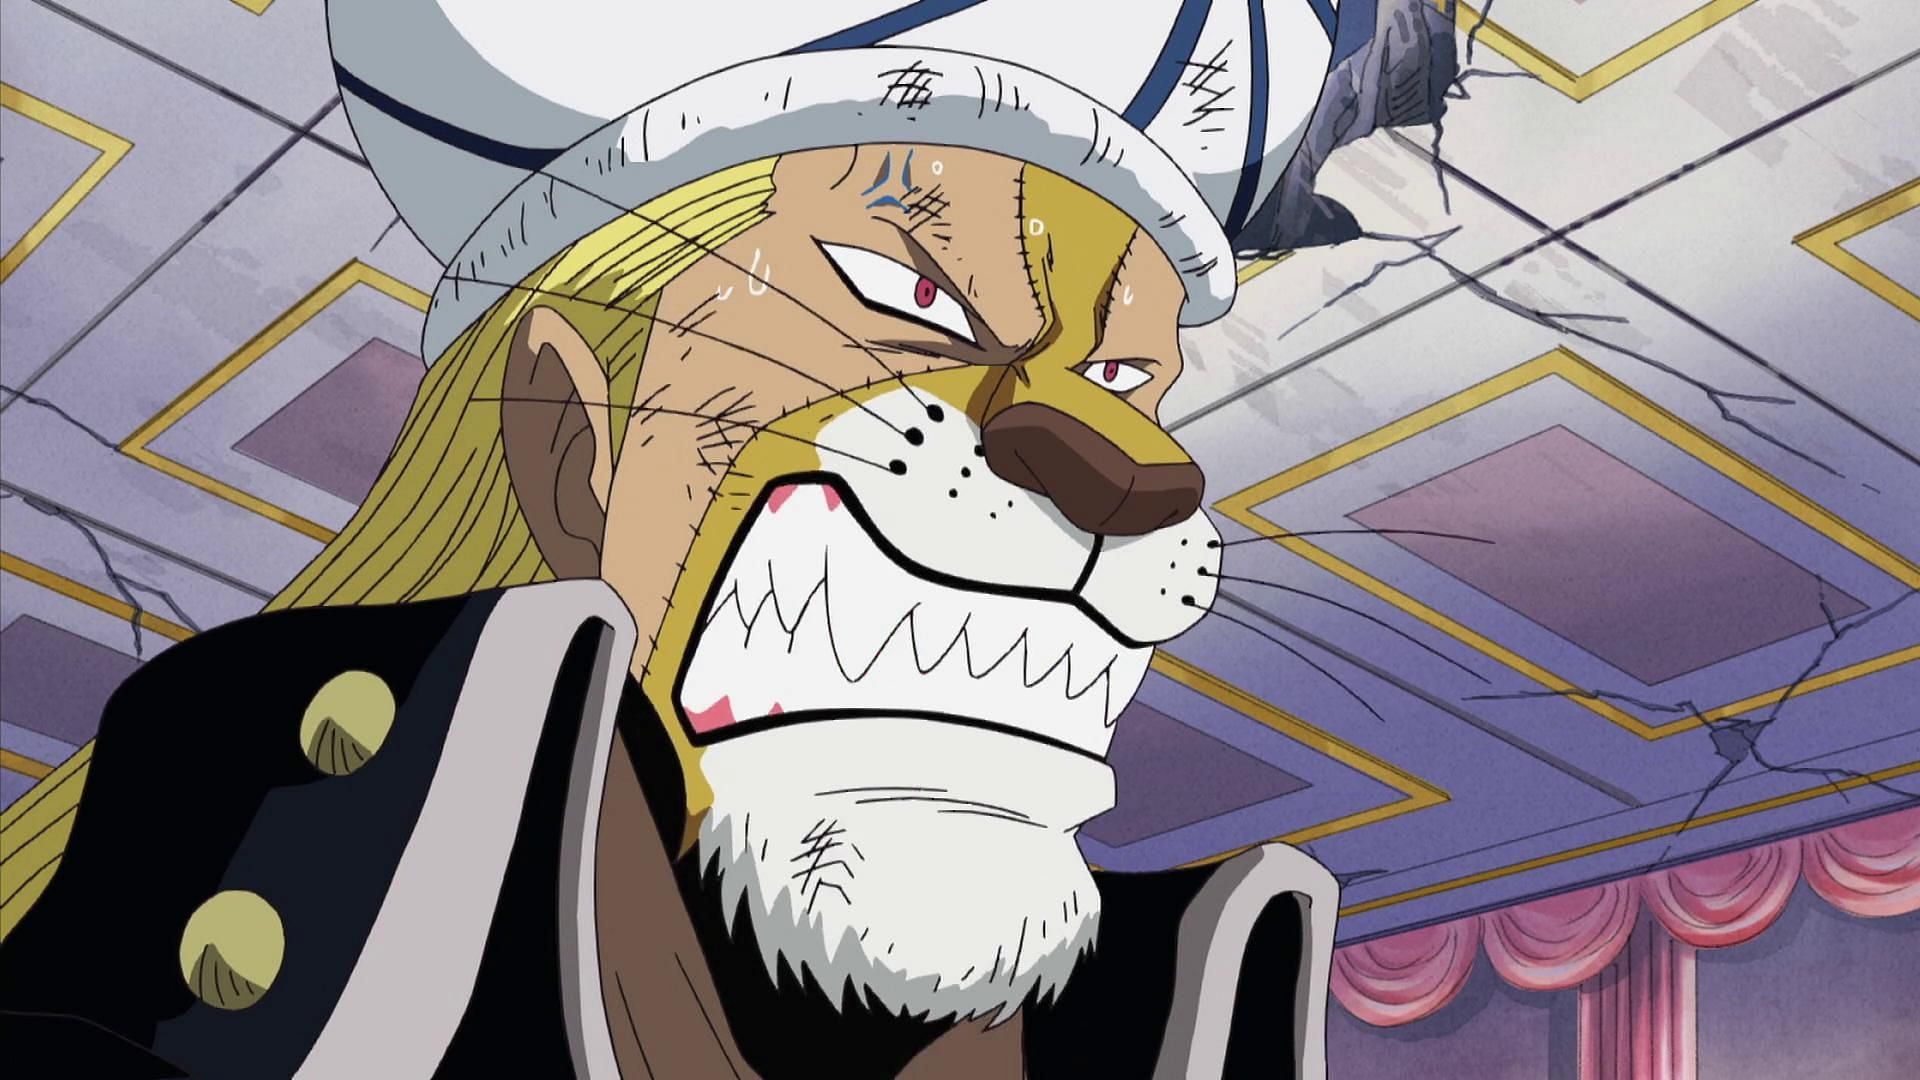 Absalom as seen in the One Piece anime (Image via Toei Animation)